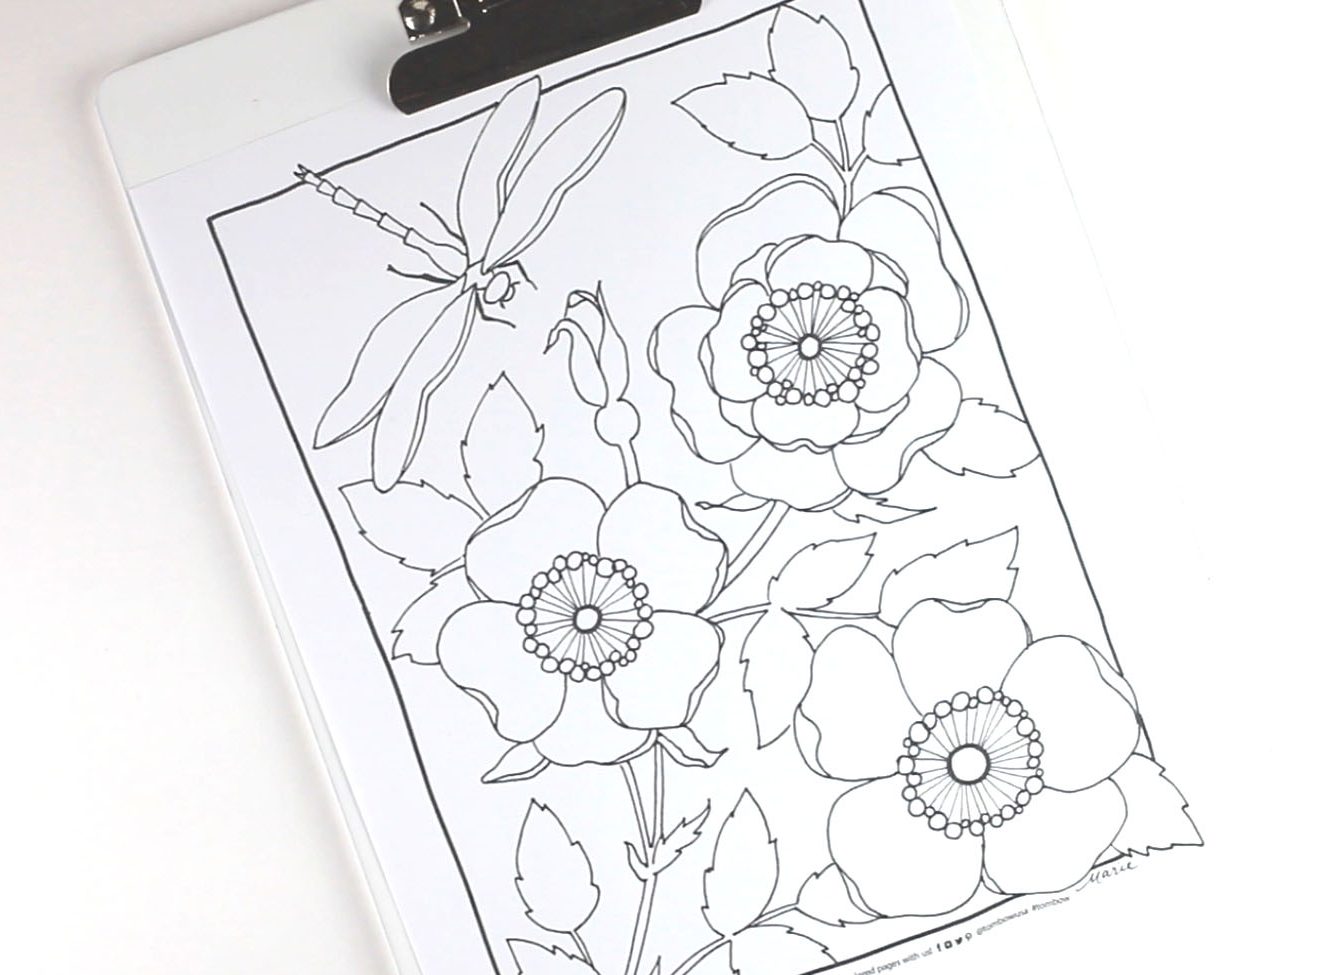 ipaint coloring sheets without color